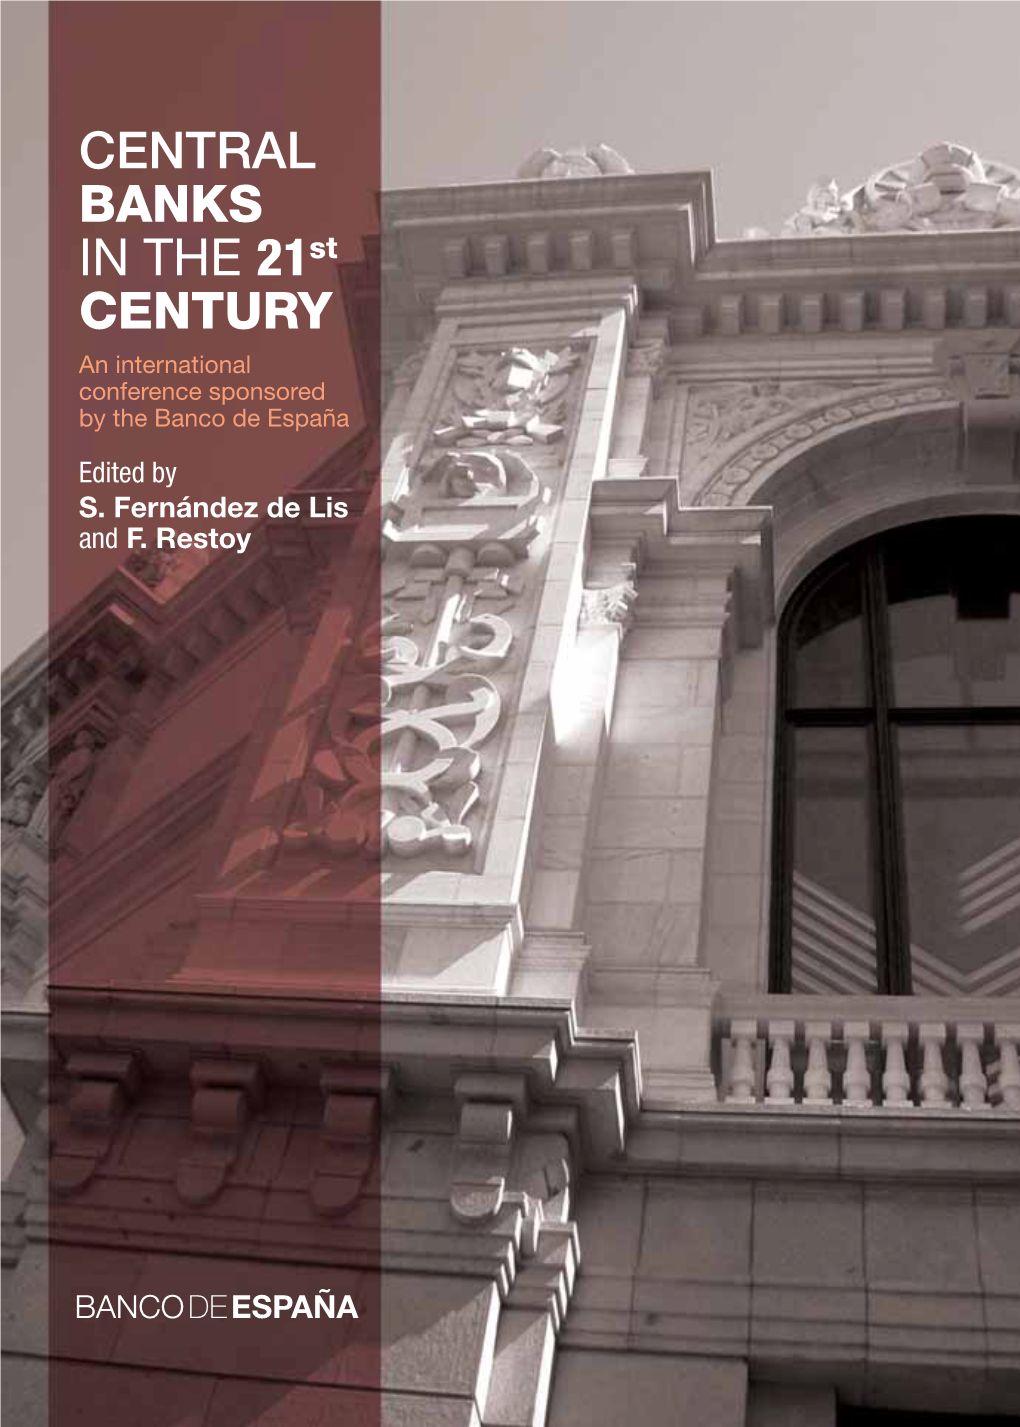 CENTRAL BANKS in the 21St CENTURY an International Conference Sponsored by the Banco De España Edited by S